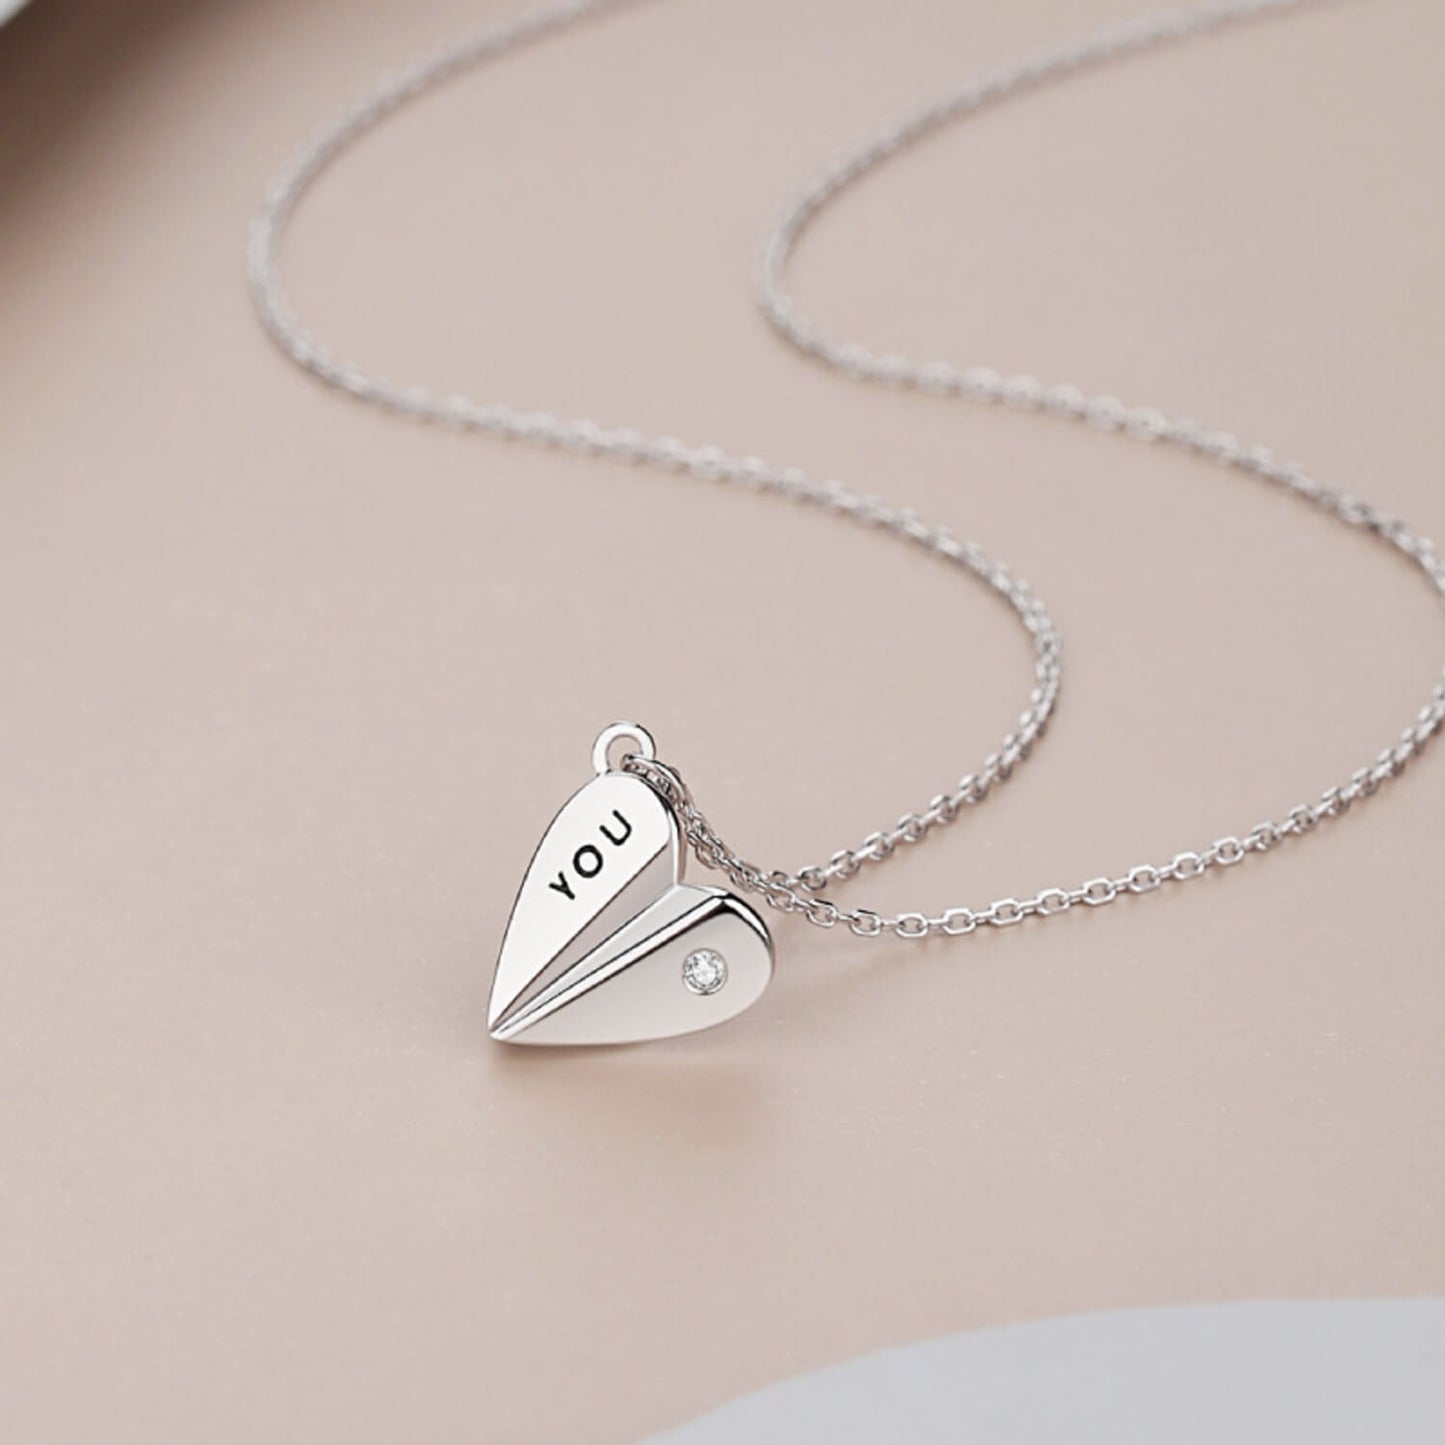 paper airplane necklace amazon